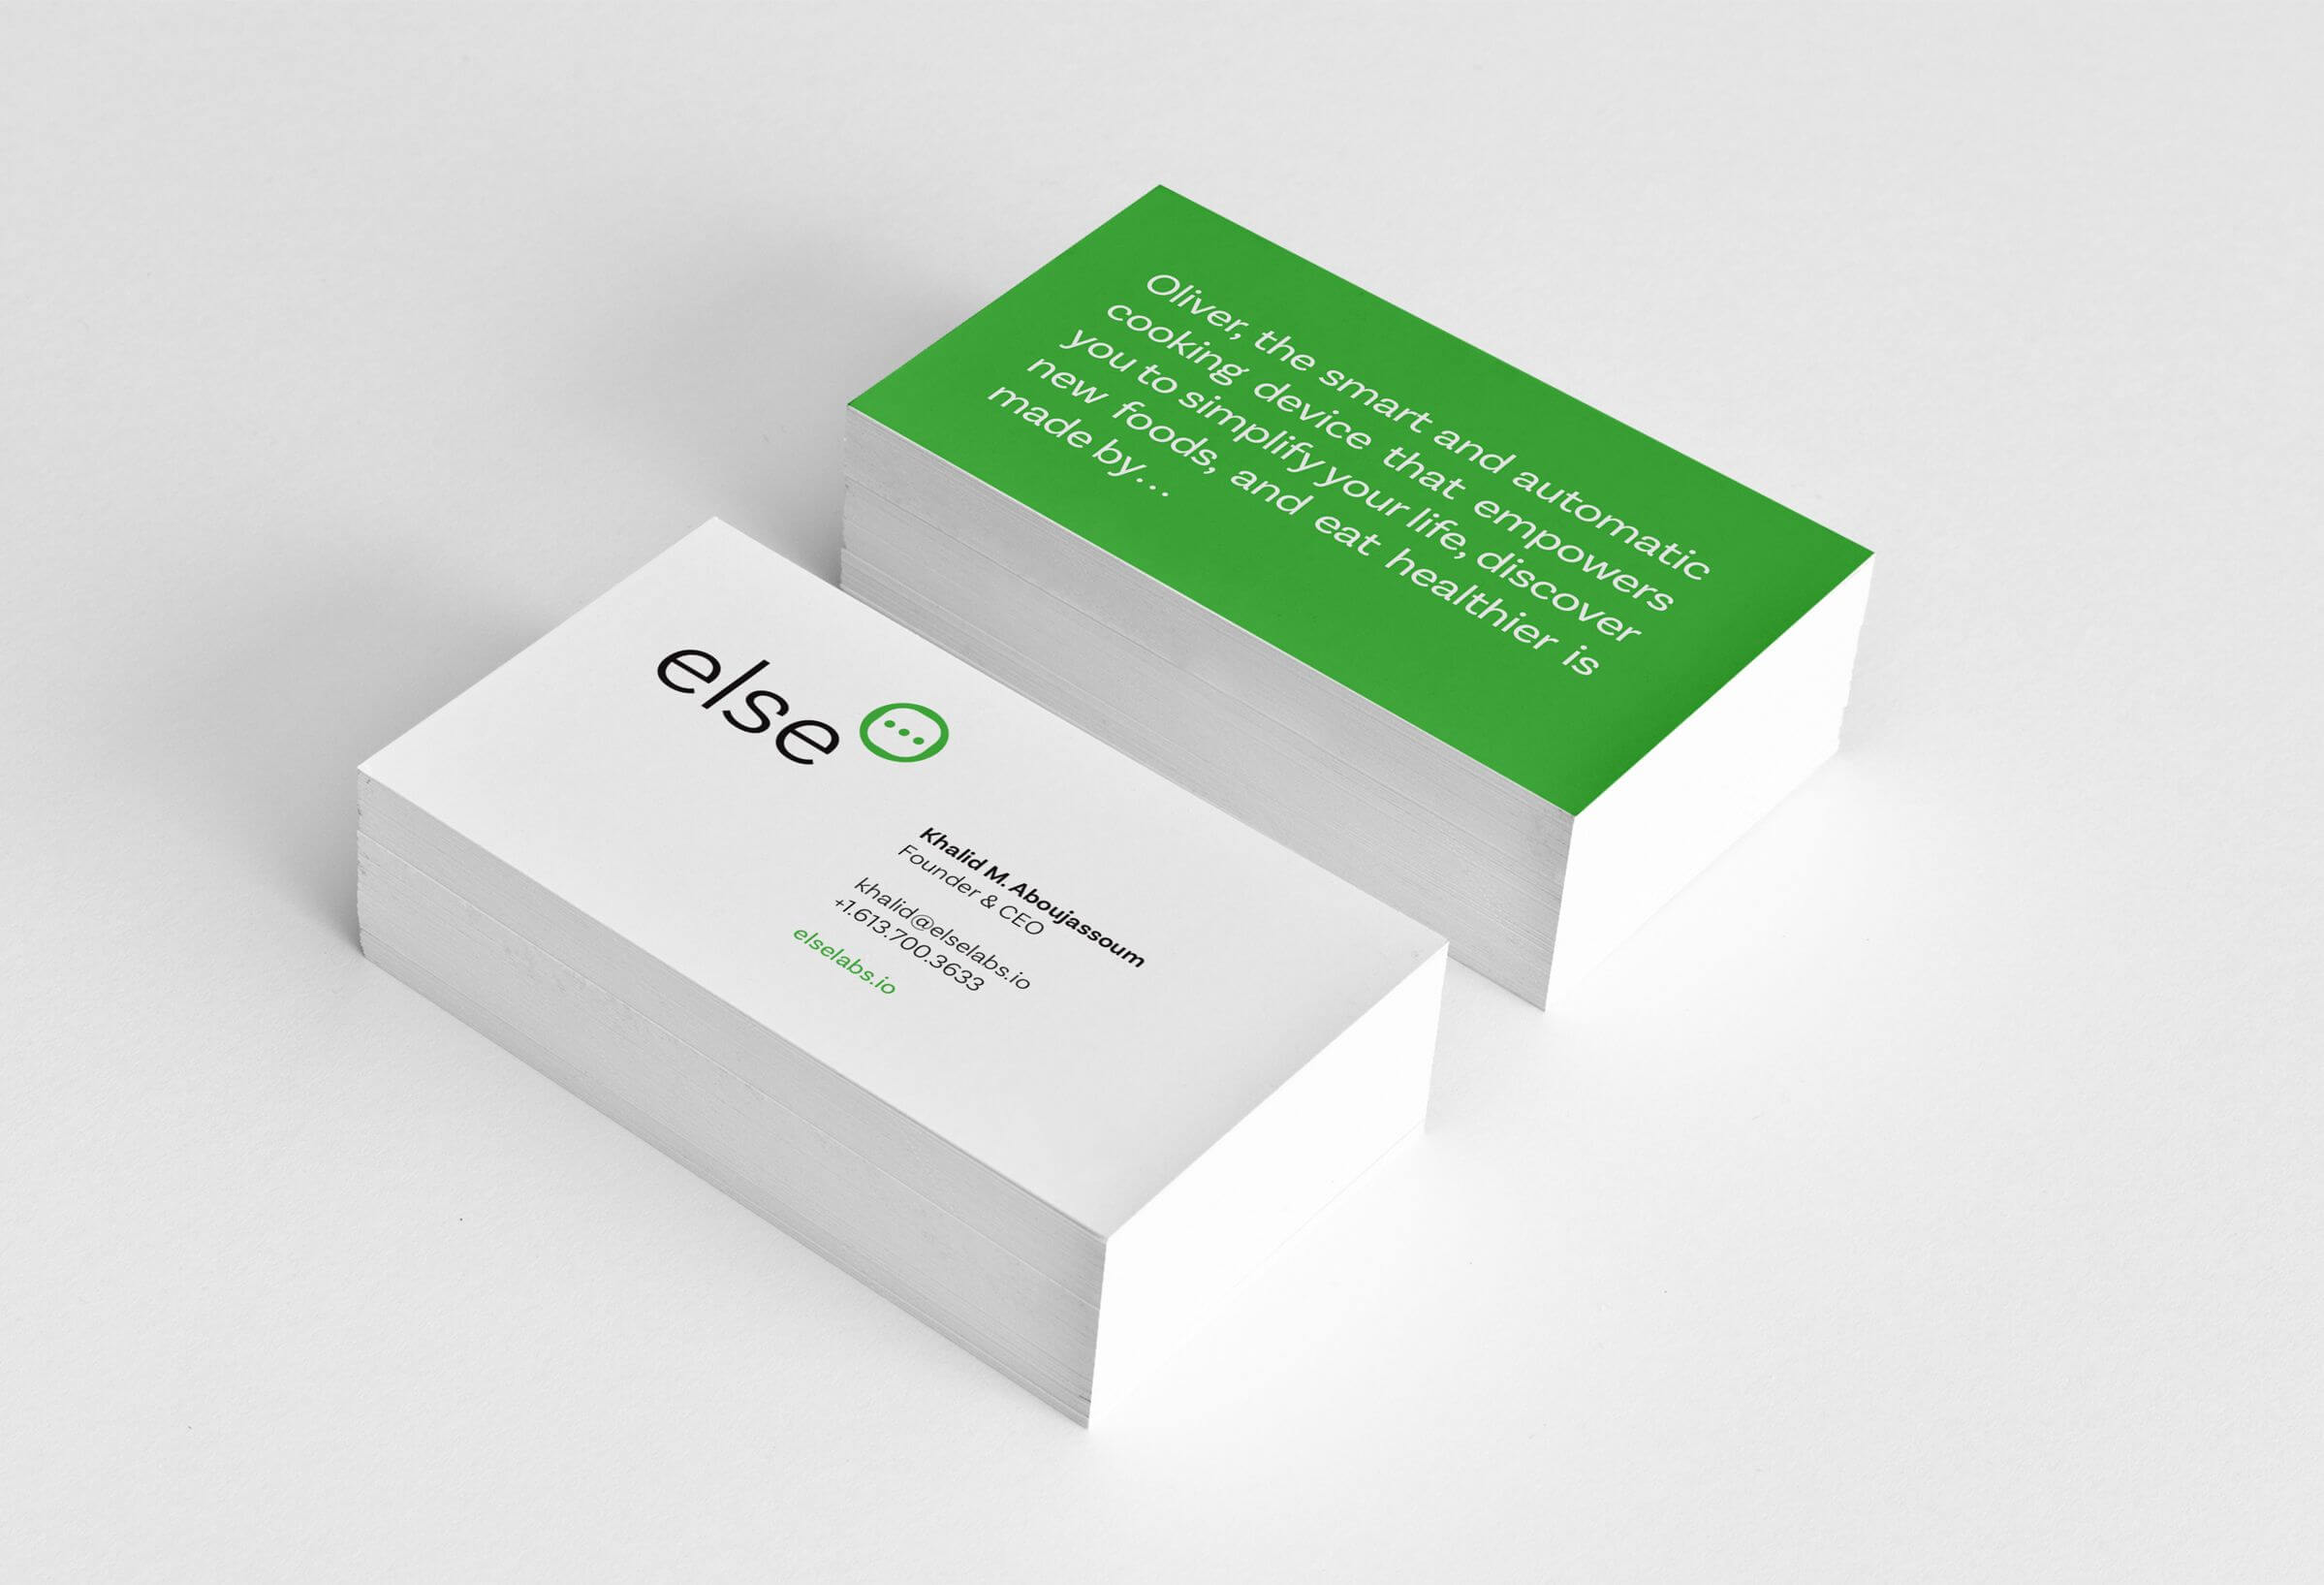 Else Labs business cards version 2 by Ottawa graphic designer idApostle